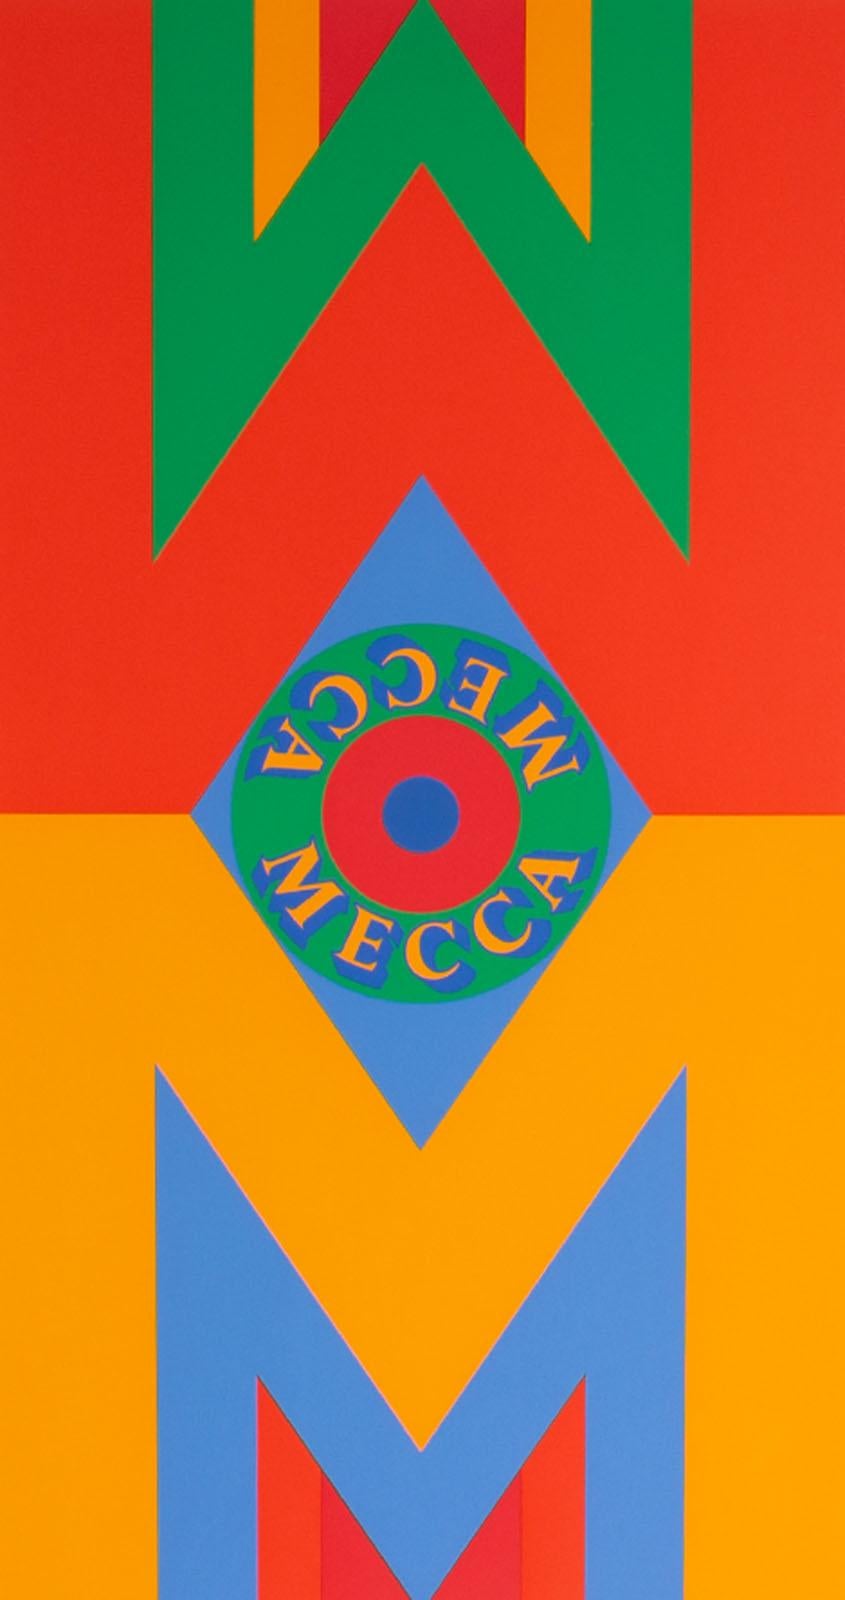 Robert Indiana Signed 1977 “Mecca II” Limited Edition Serigraph 2